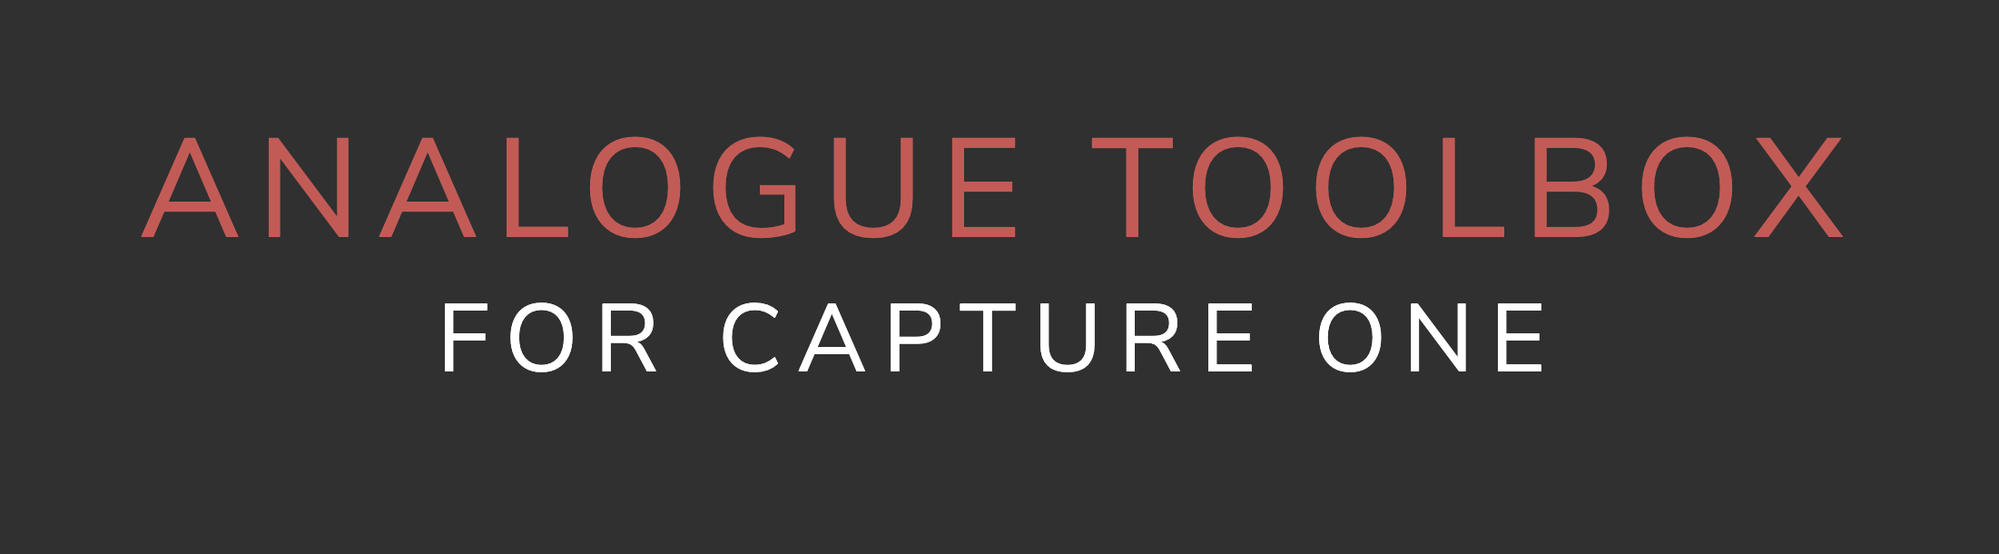 Analogue Toolbox for Capture One